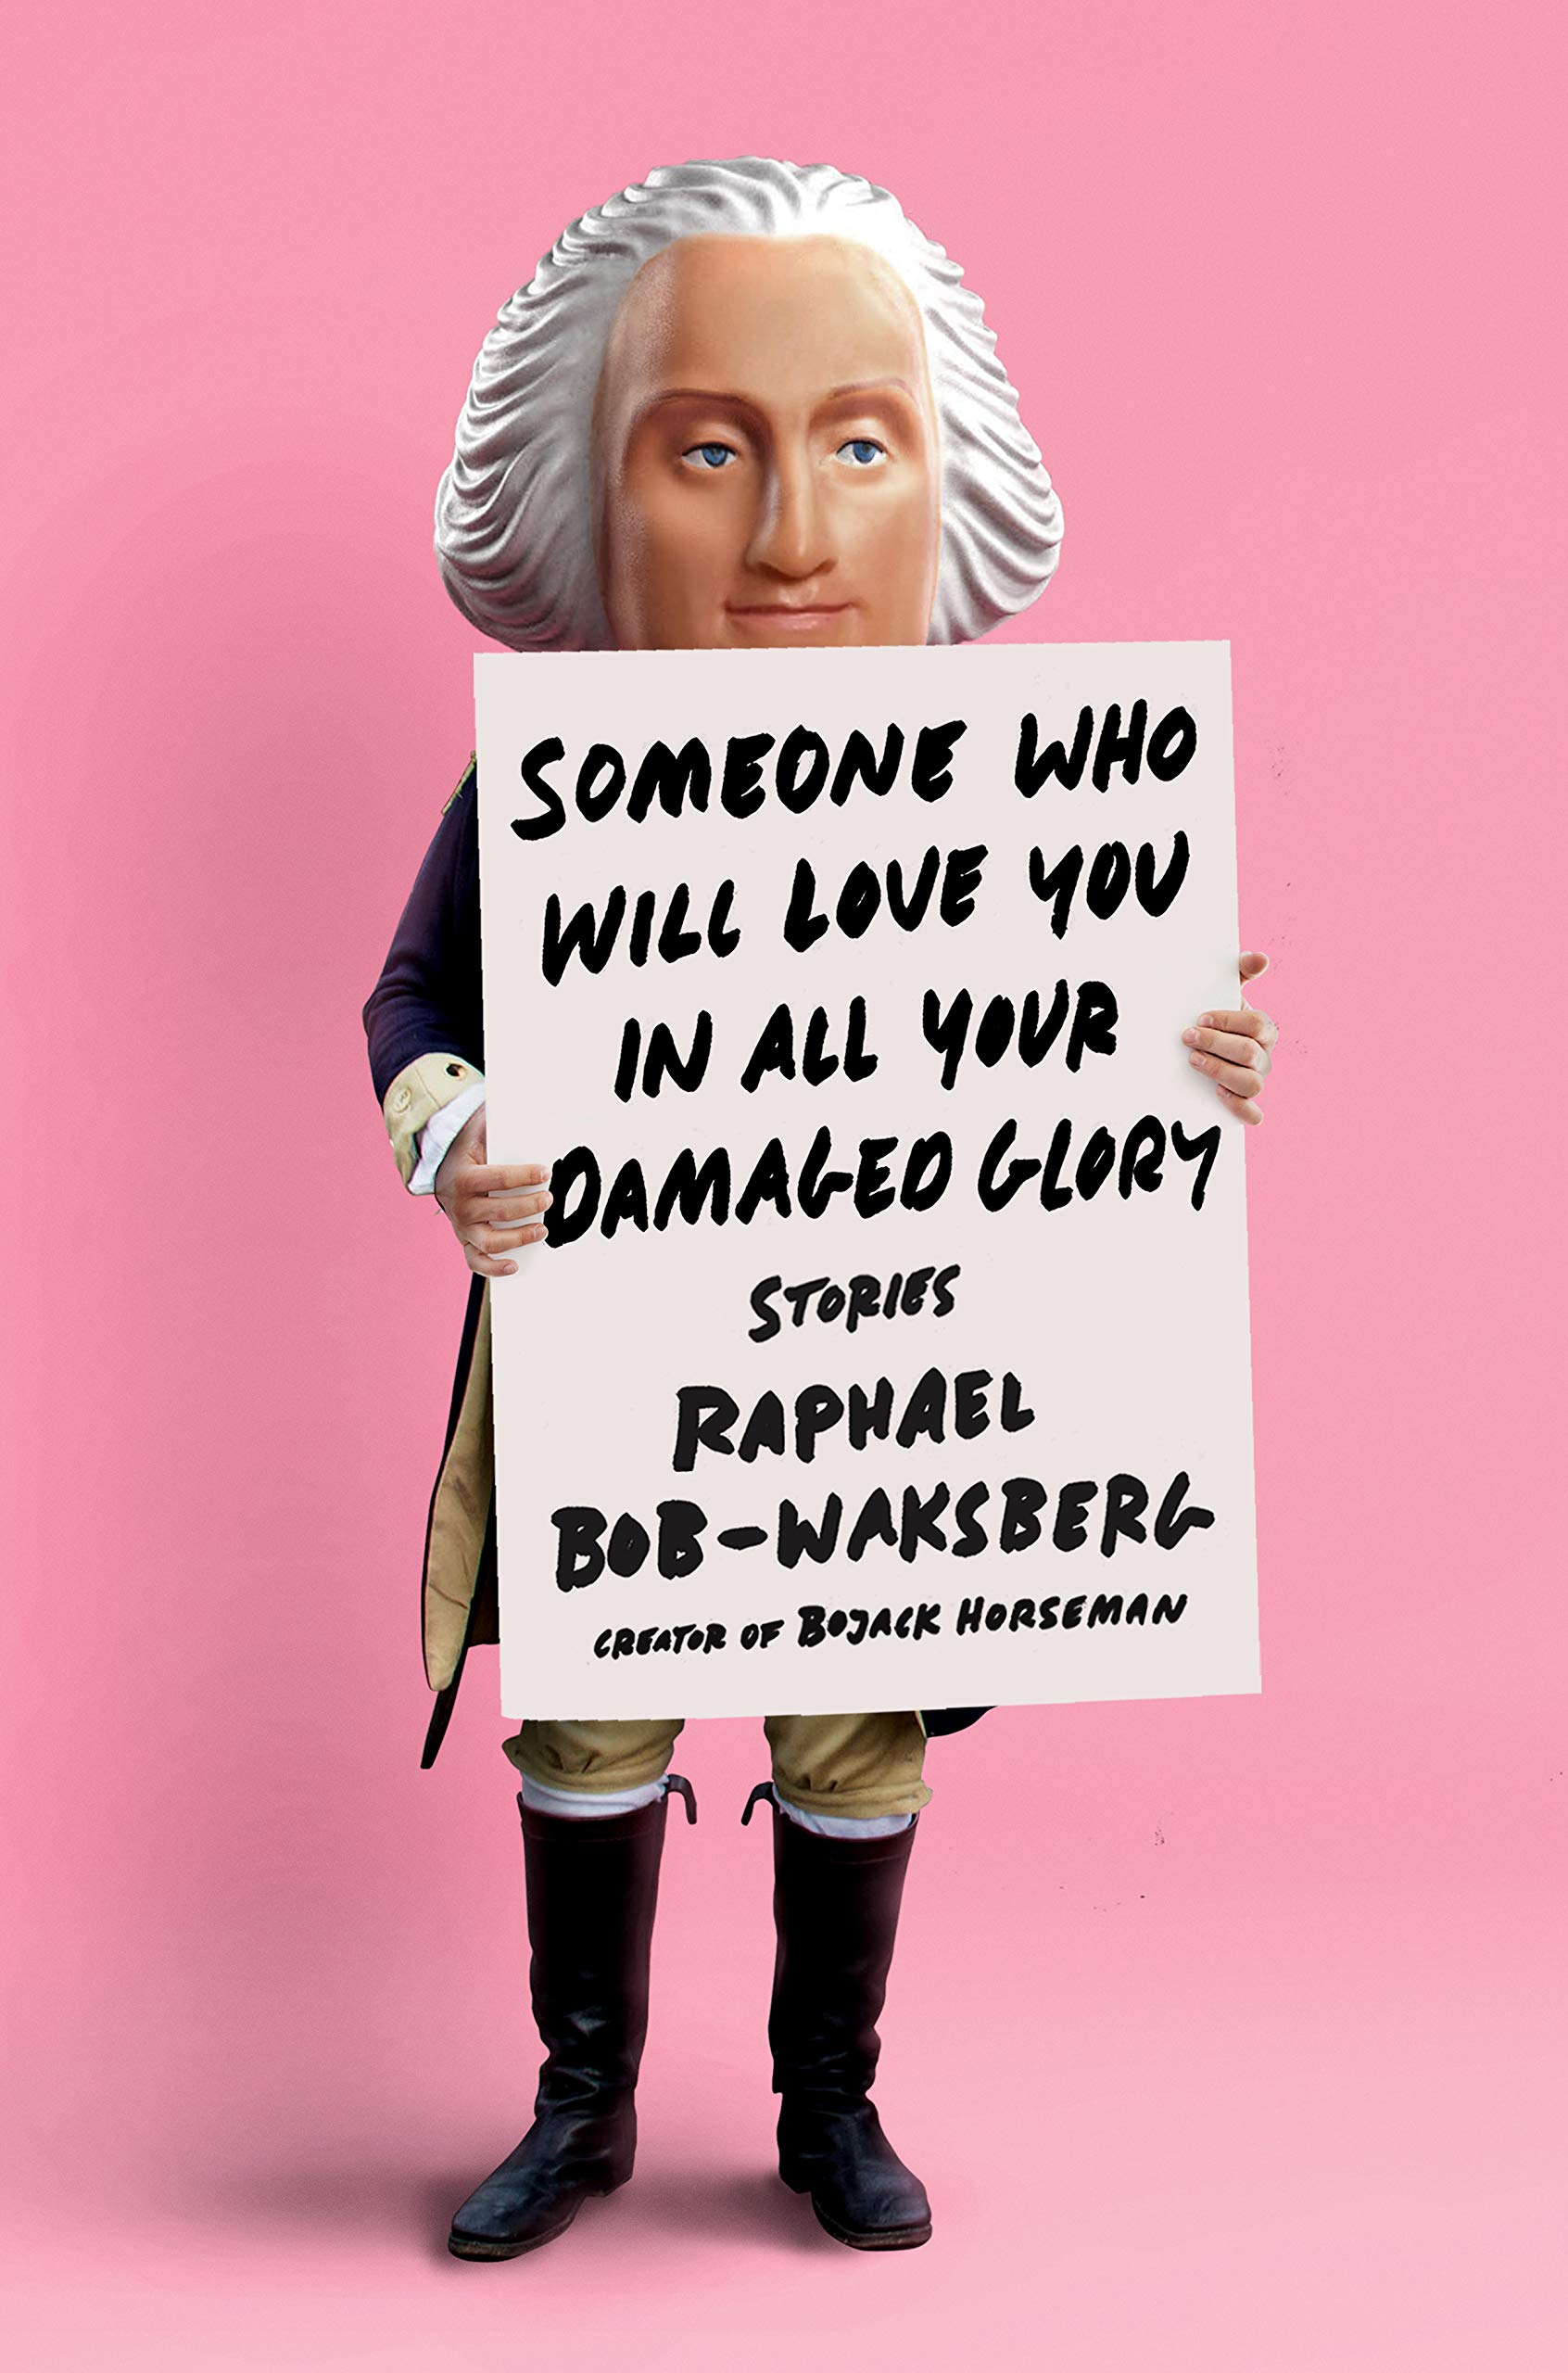 A person in a period costume with a giant caricature head of a classical composer, holding a sign promoting a book titled "someone who will love you in all your damaged glory: stories" by raphael bob-waksberg.